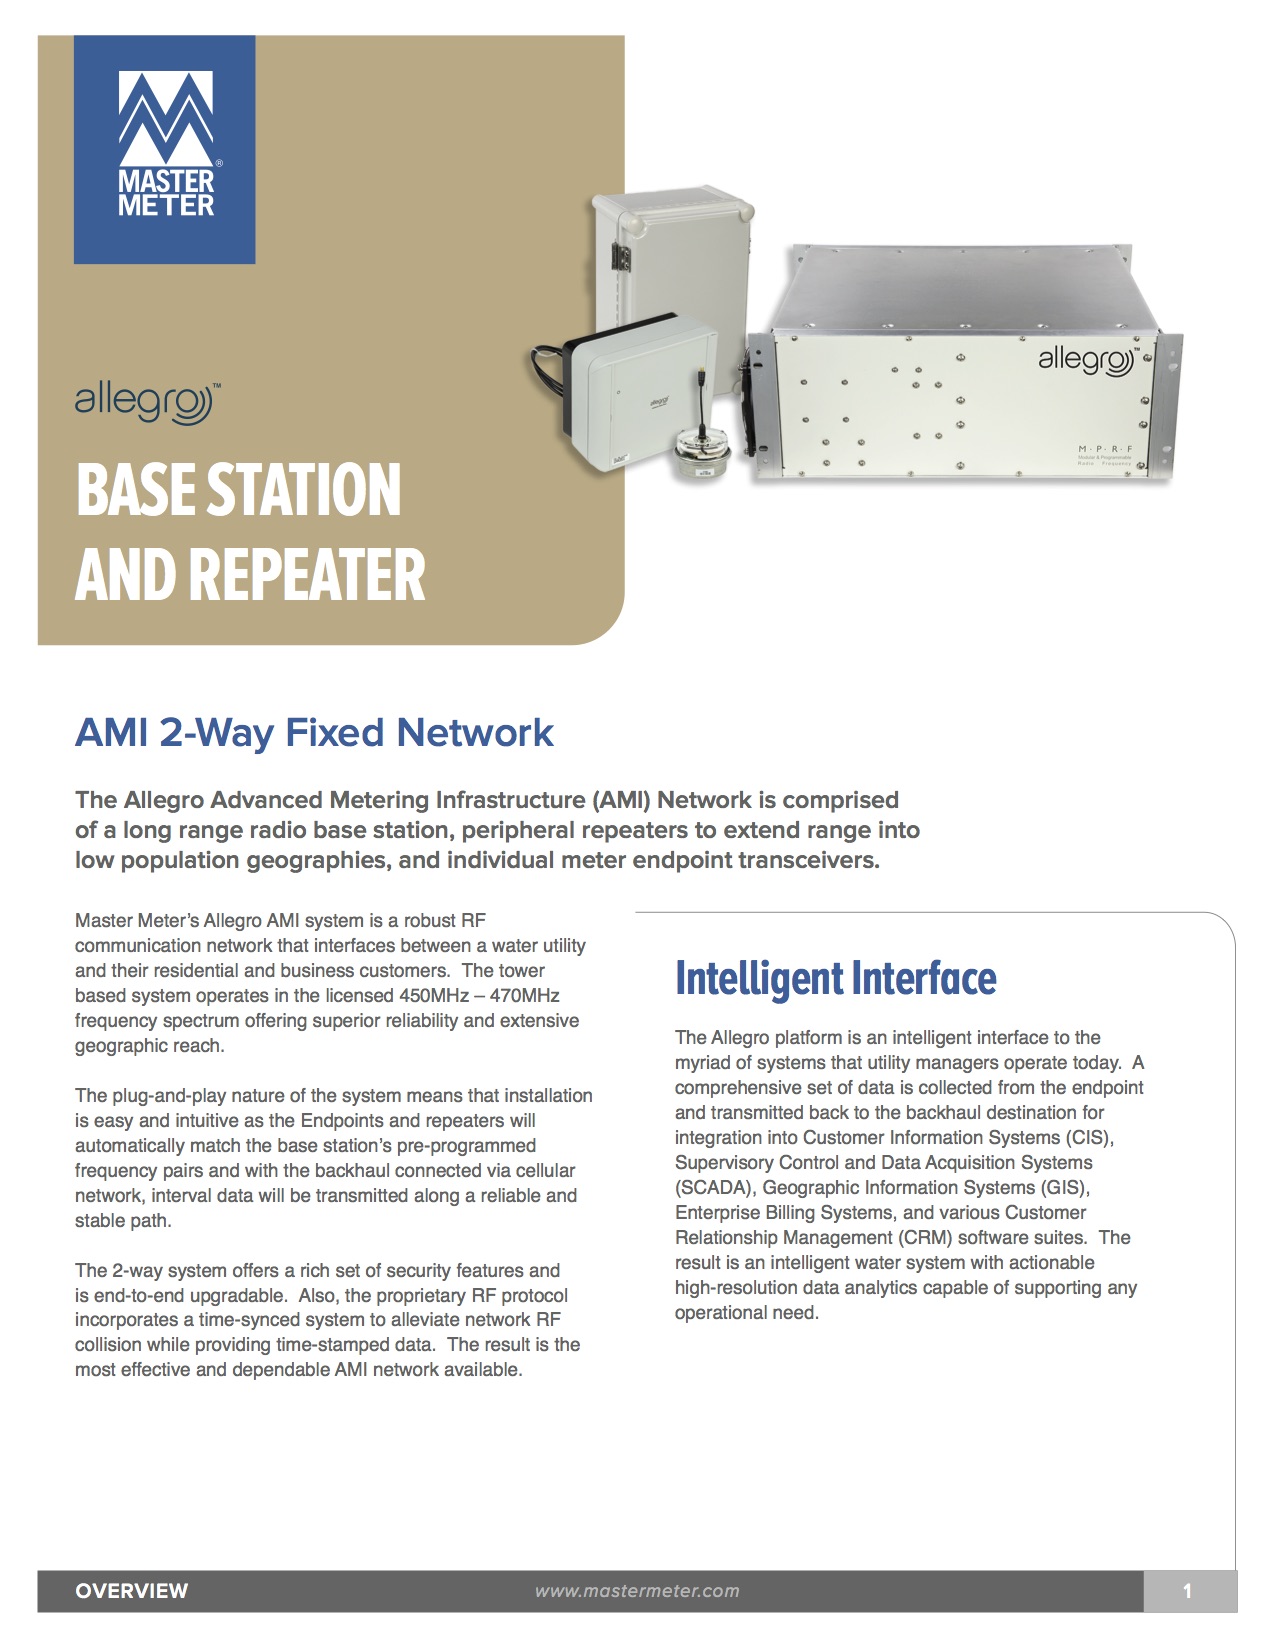 Allegro Allegro Base Station and Repeaters